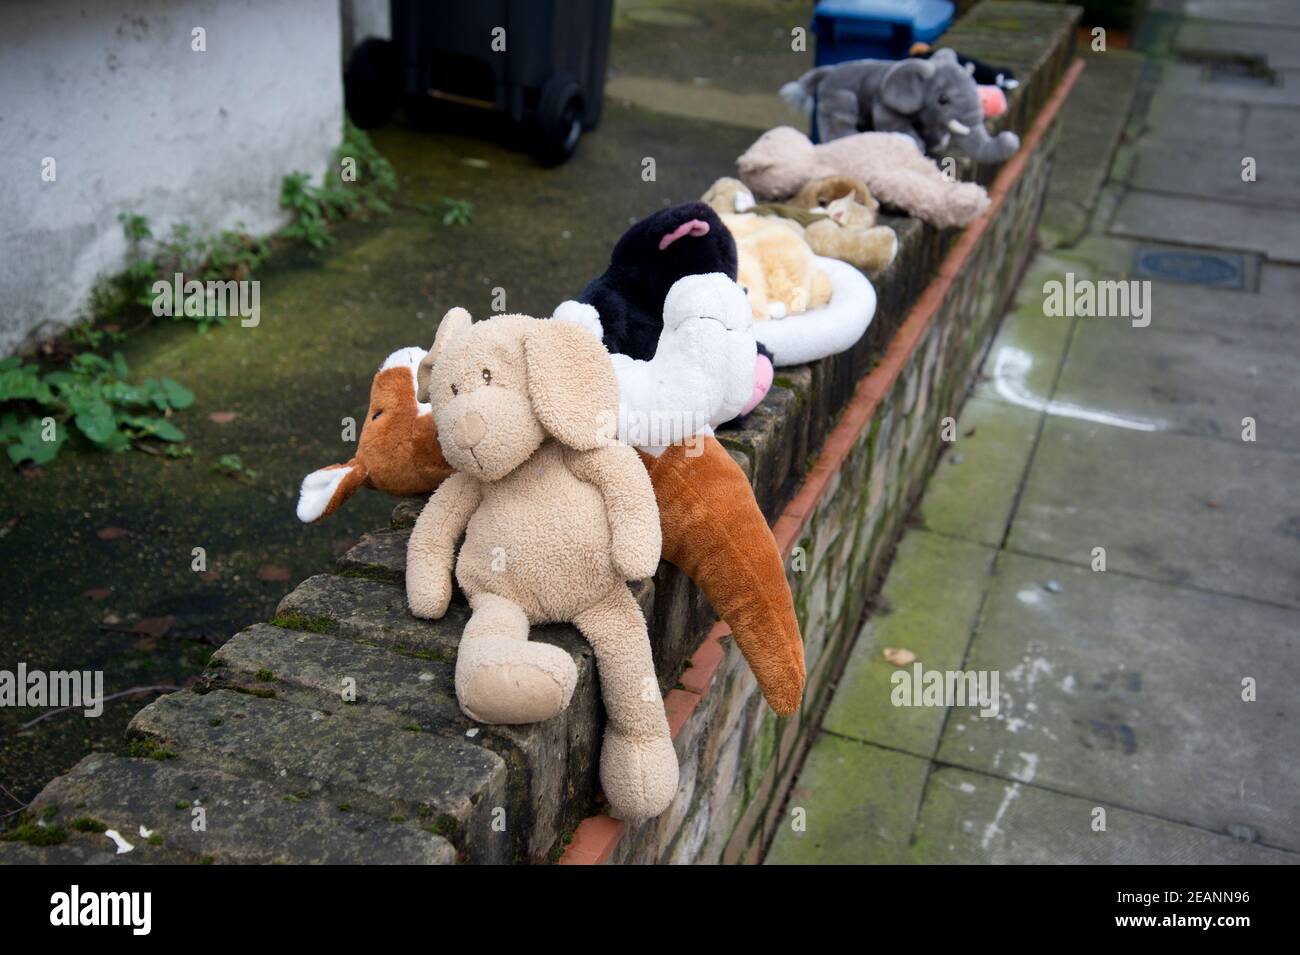 February in Hackney. Ellingfort Road. Cuddly toys put out on a wall. Stock Photo